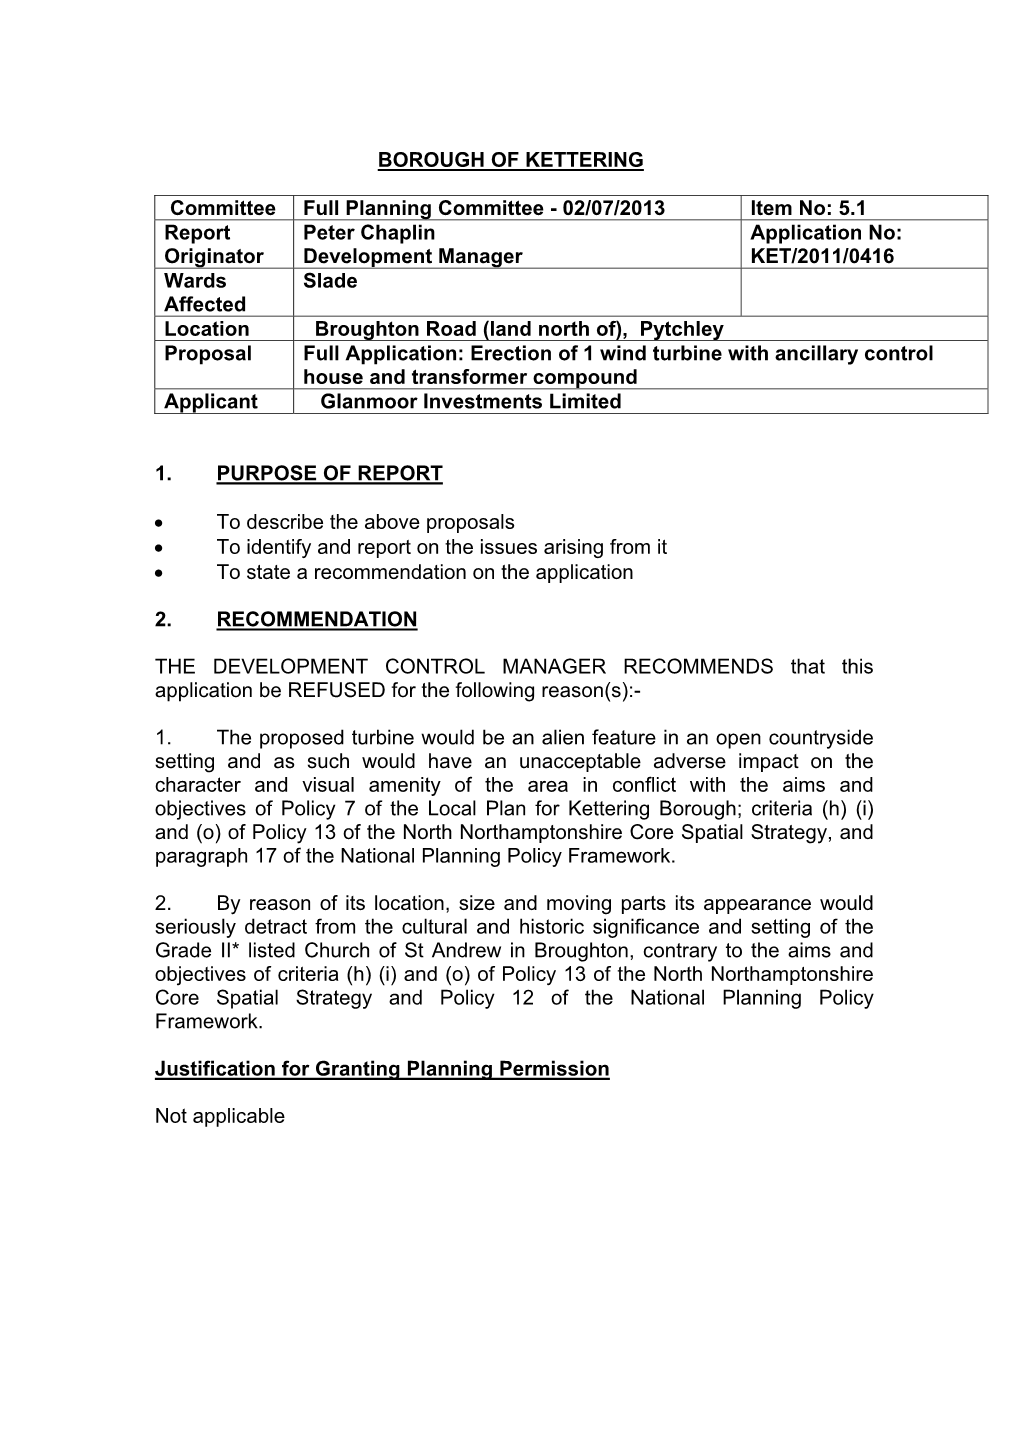 Pytchley Proposal Full Application: Erection of 1 Wind Turbine with Ancillary Control House and Transformer Compound Applicant Glanmoor Investments Limited